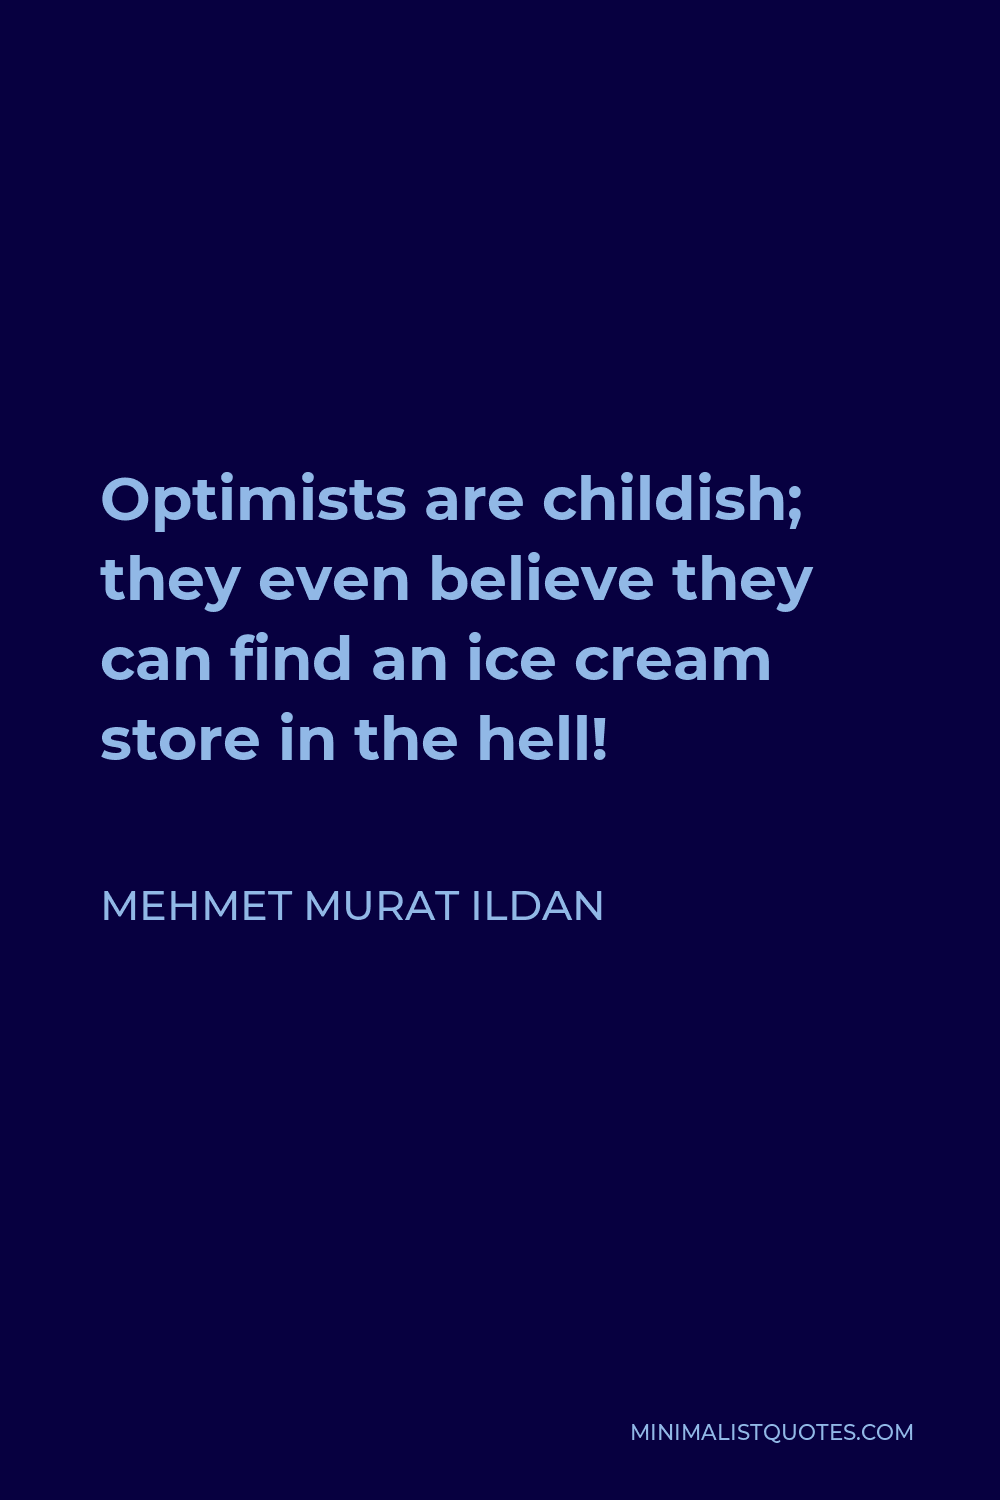 Mehmet Murat Ildan Quote - Optimists are childish; they even believe they can find an ice cream store in the hell!